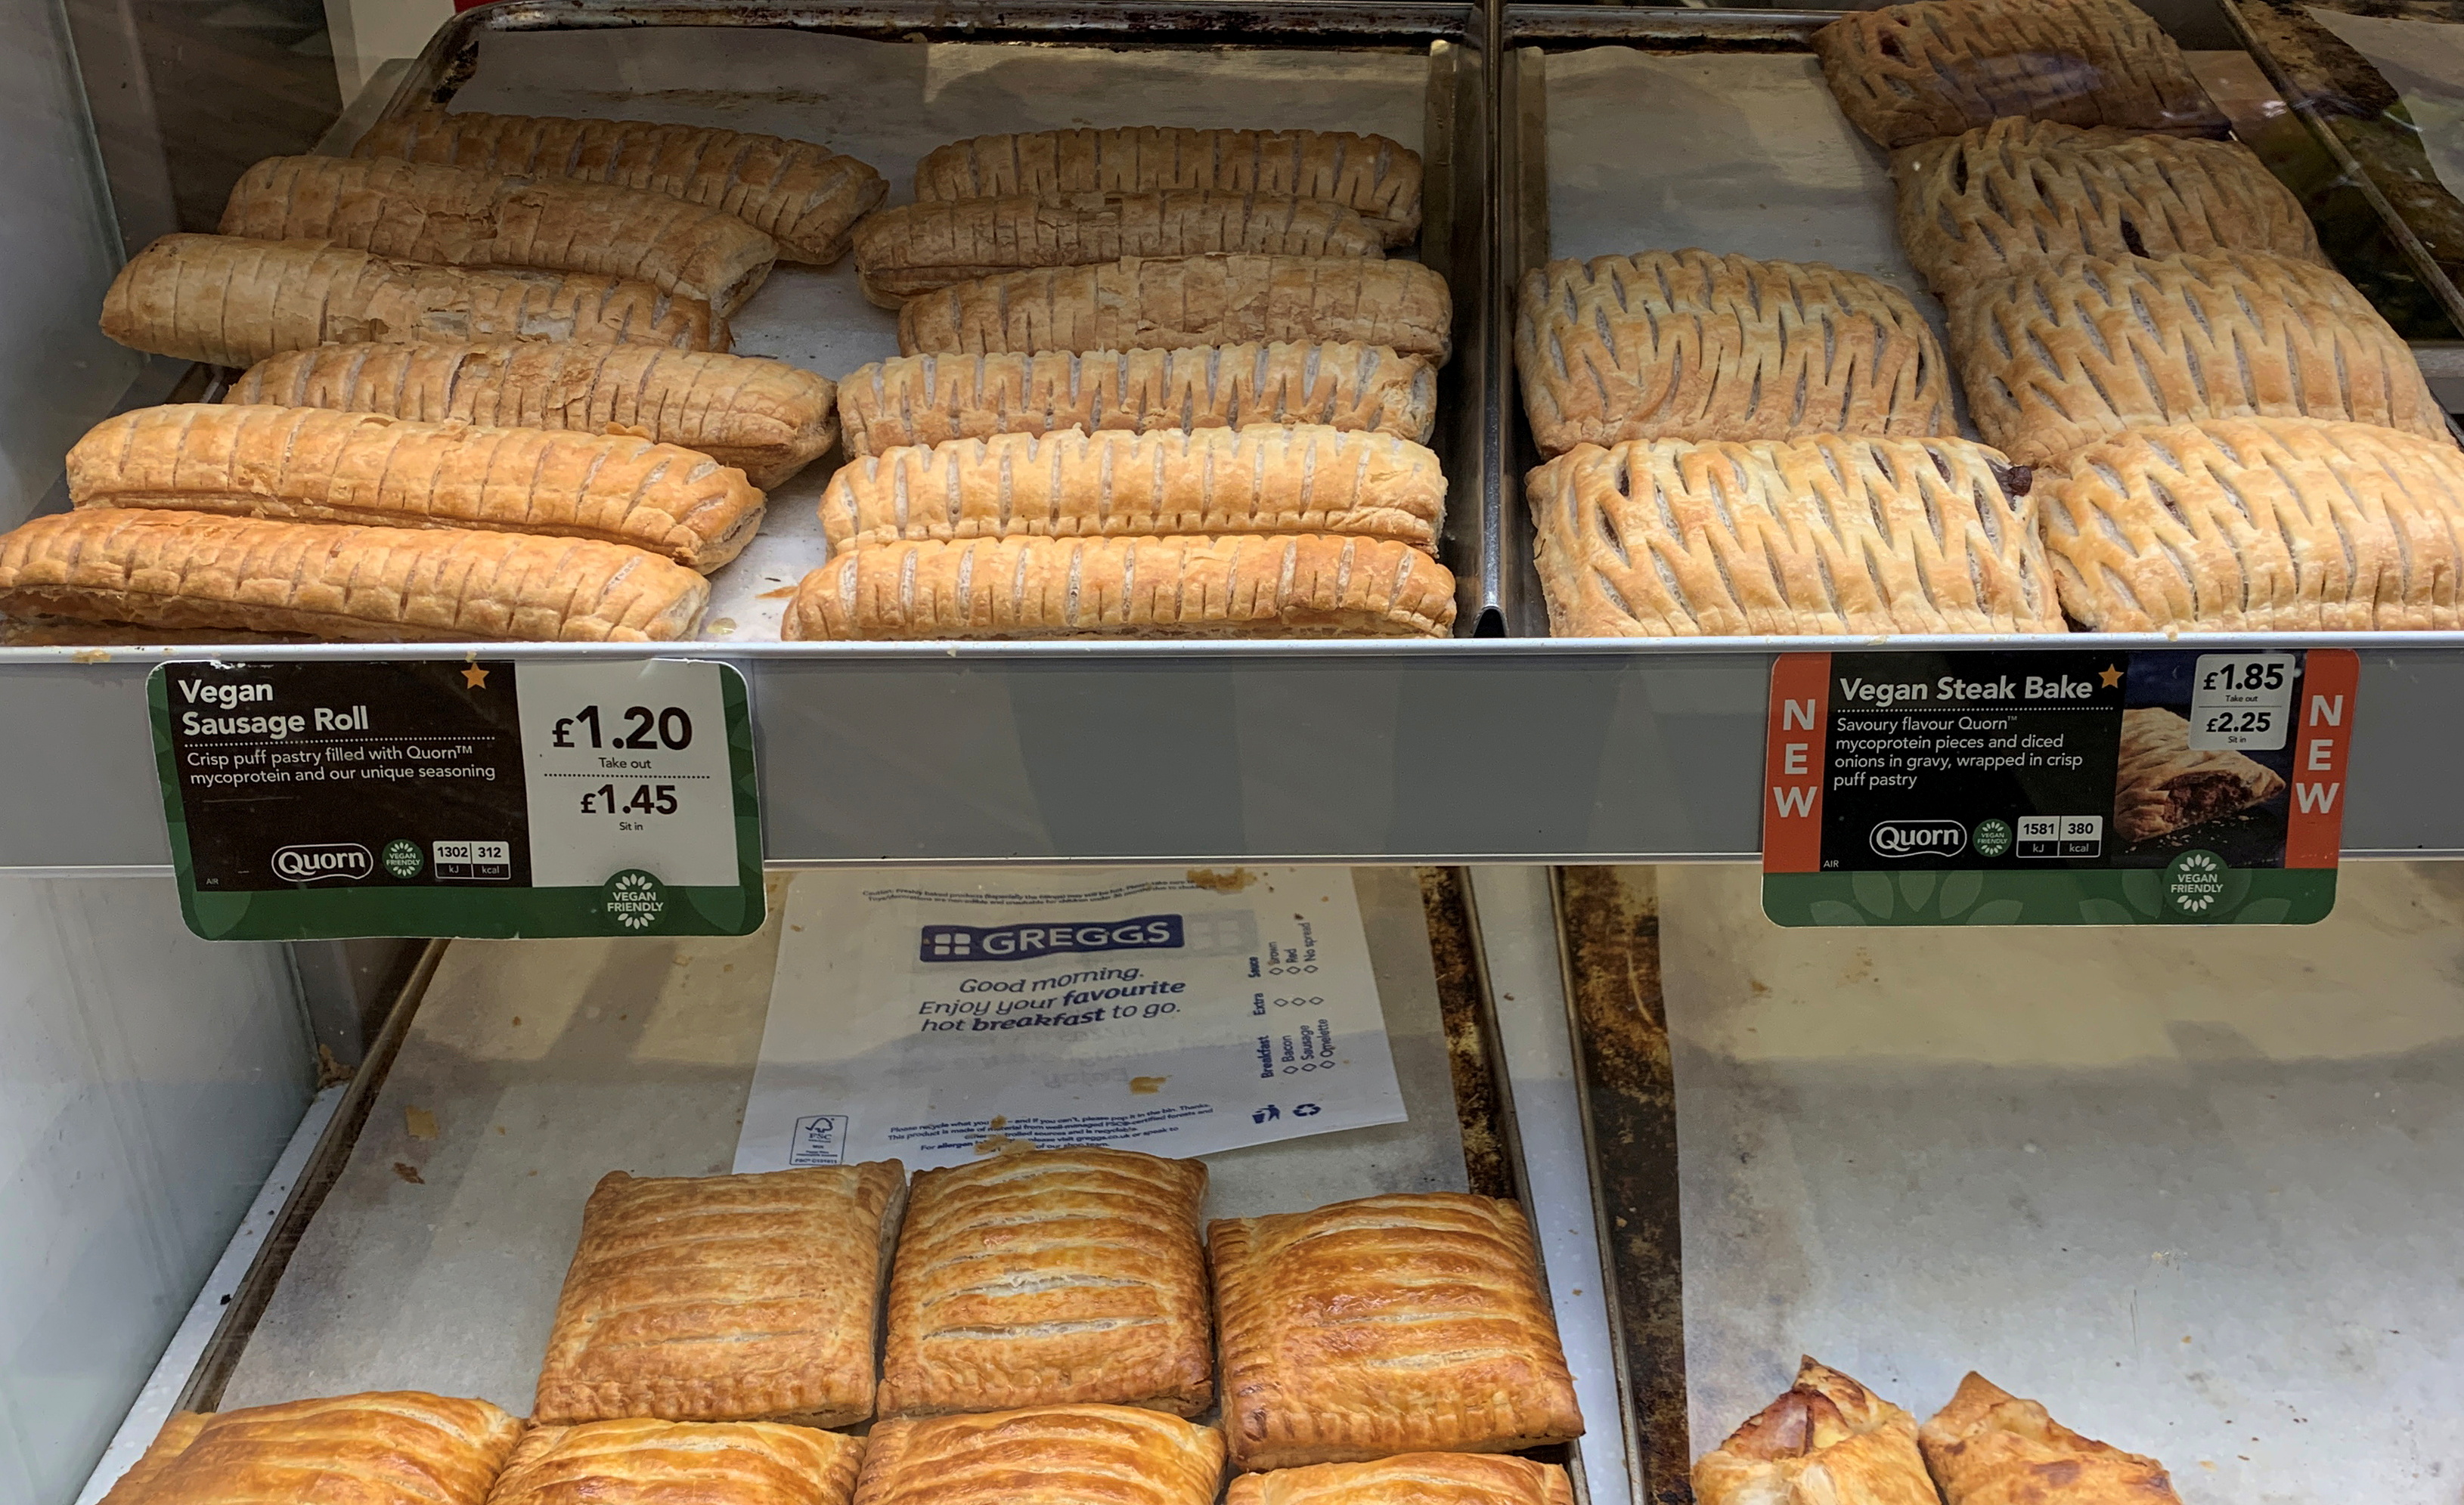 Vegan sausage rolls and Steak Bakes are seen for sale in a Greggs bakery near Manchester